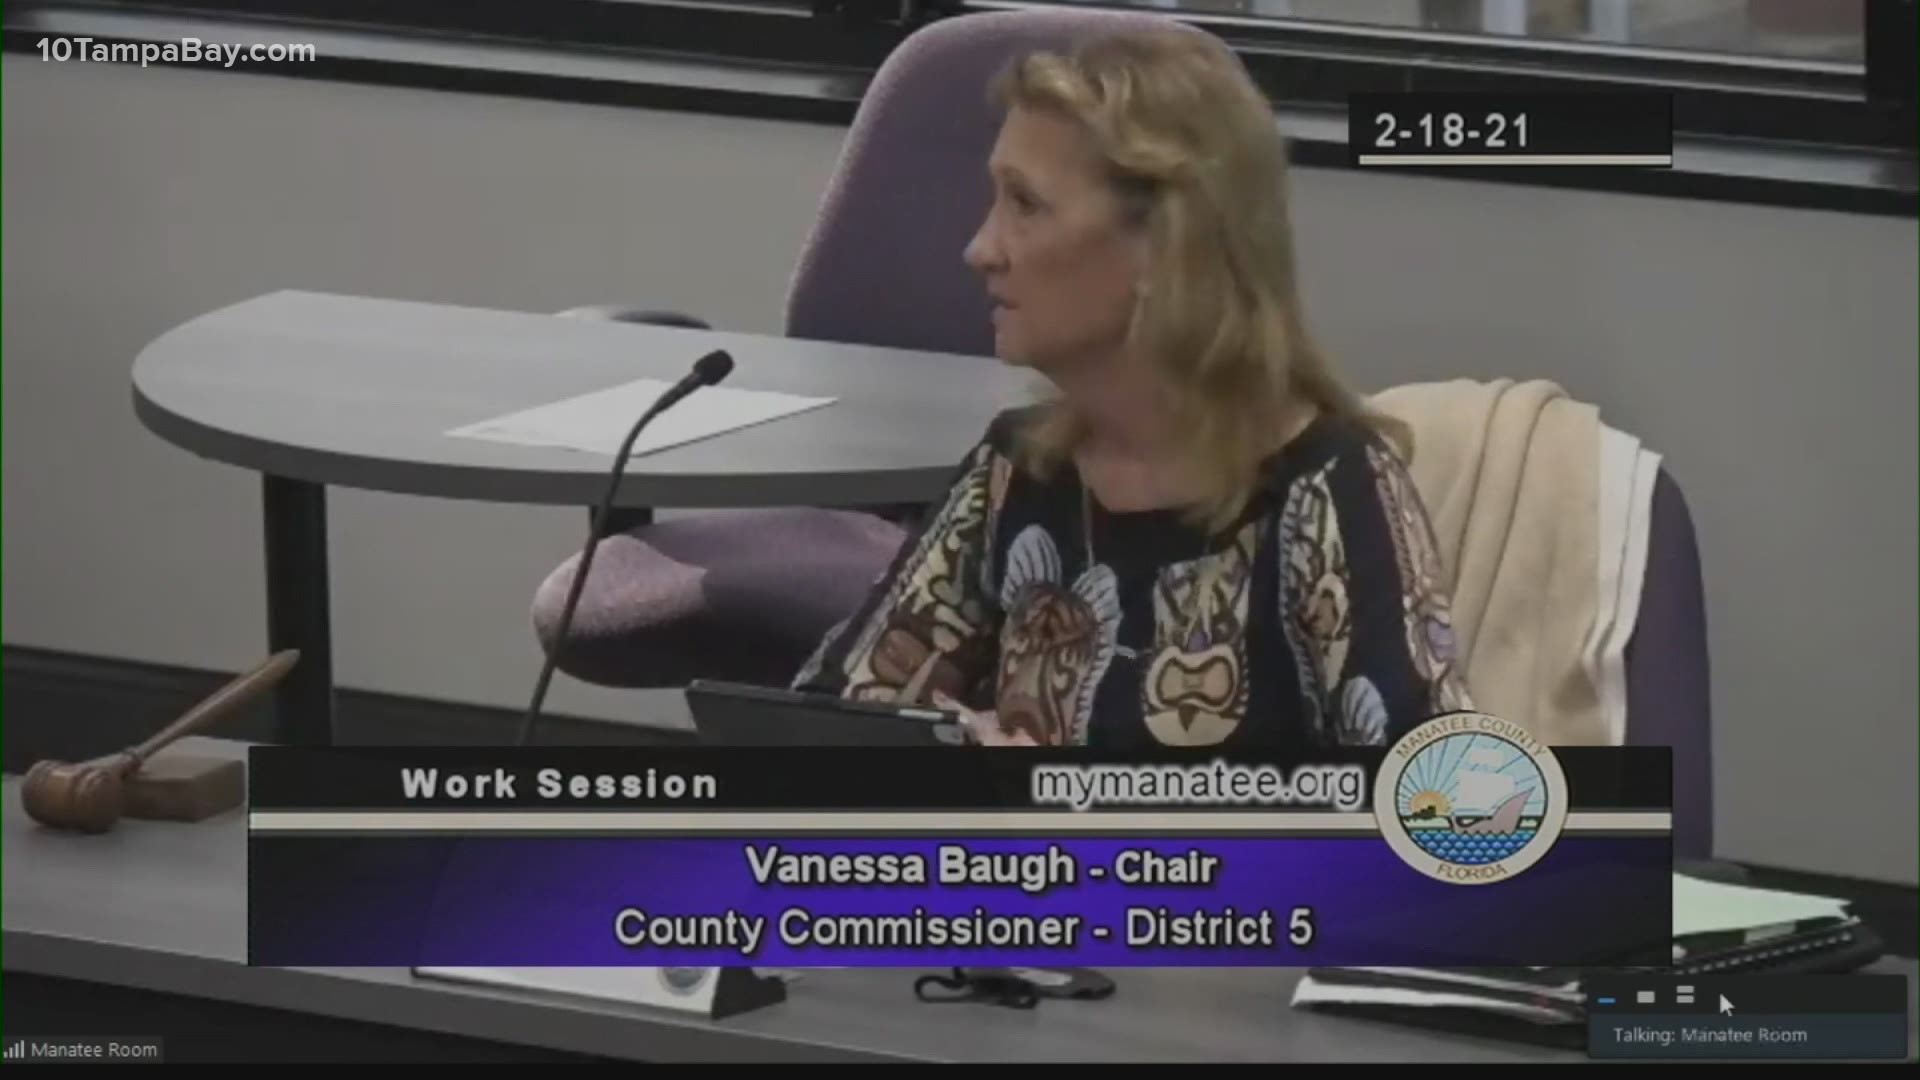 Emails obtained by 10 Tampa Bay show Vanessa Baugh asked for herself and four others to be able to get vaccinated at the controversial Lakewood Ranch site.